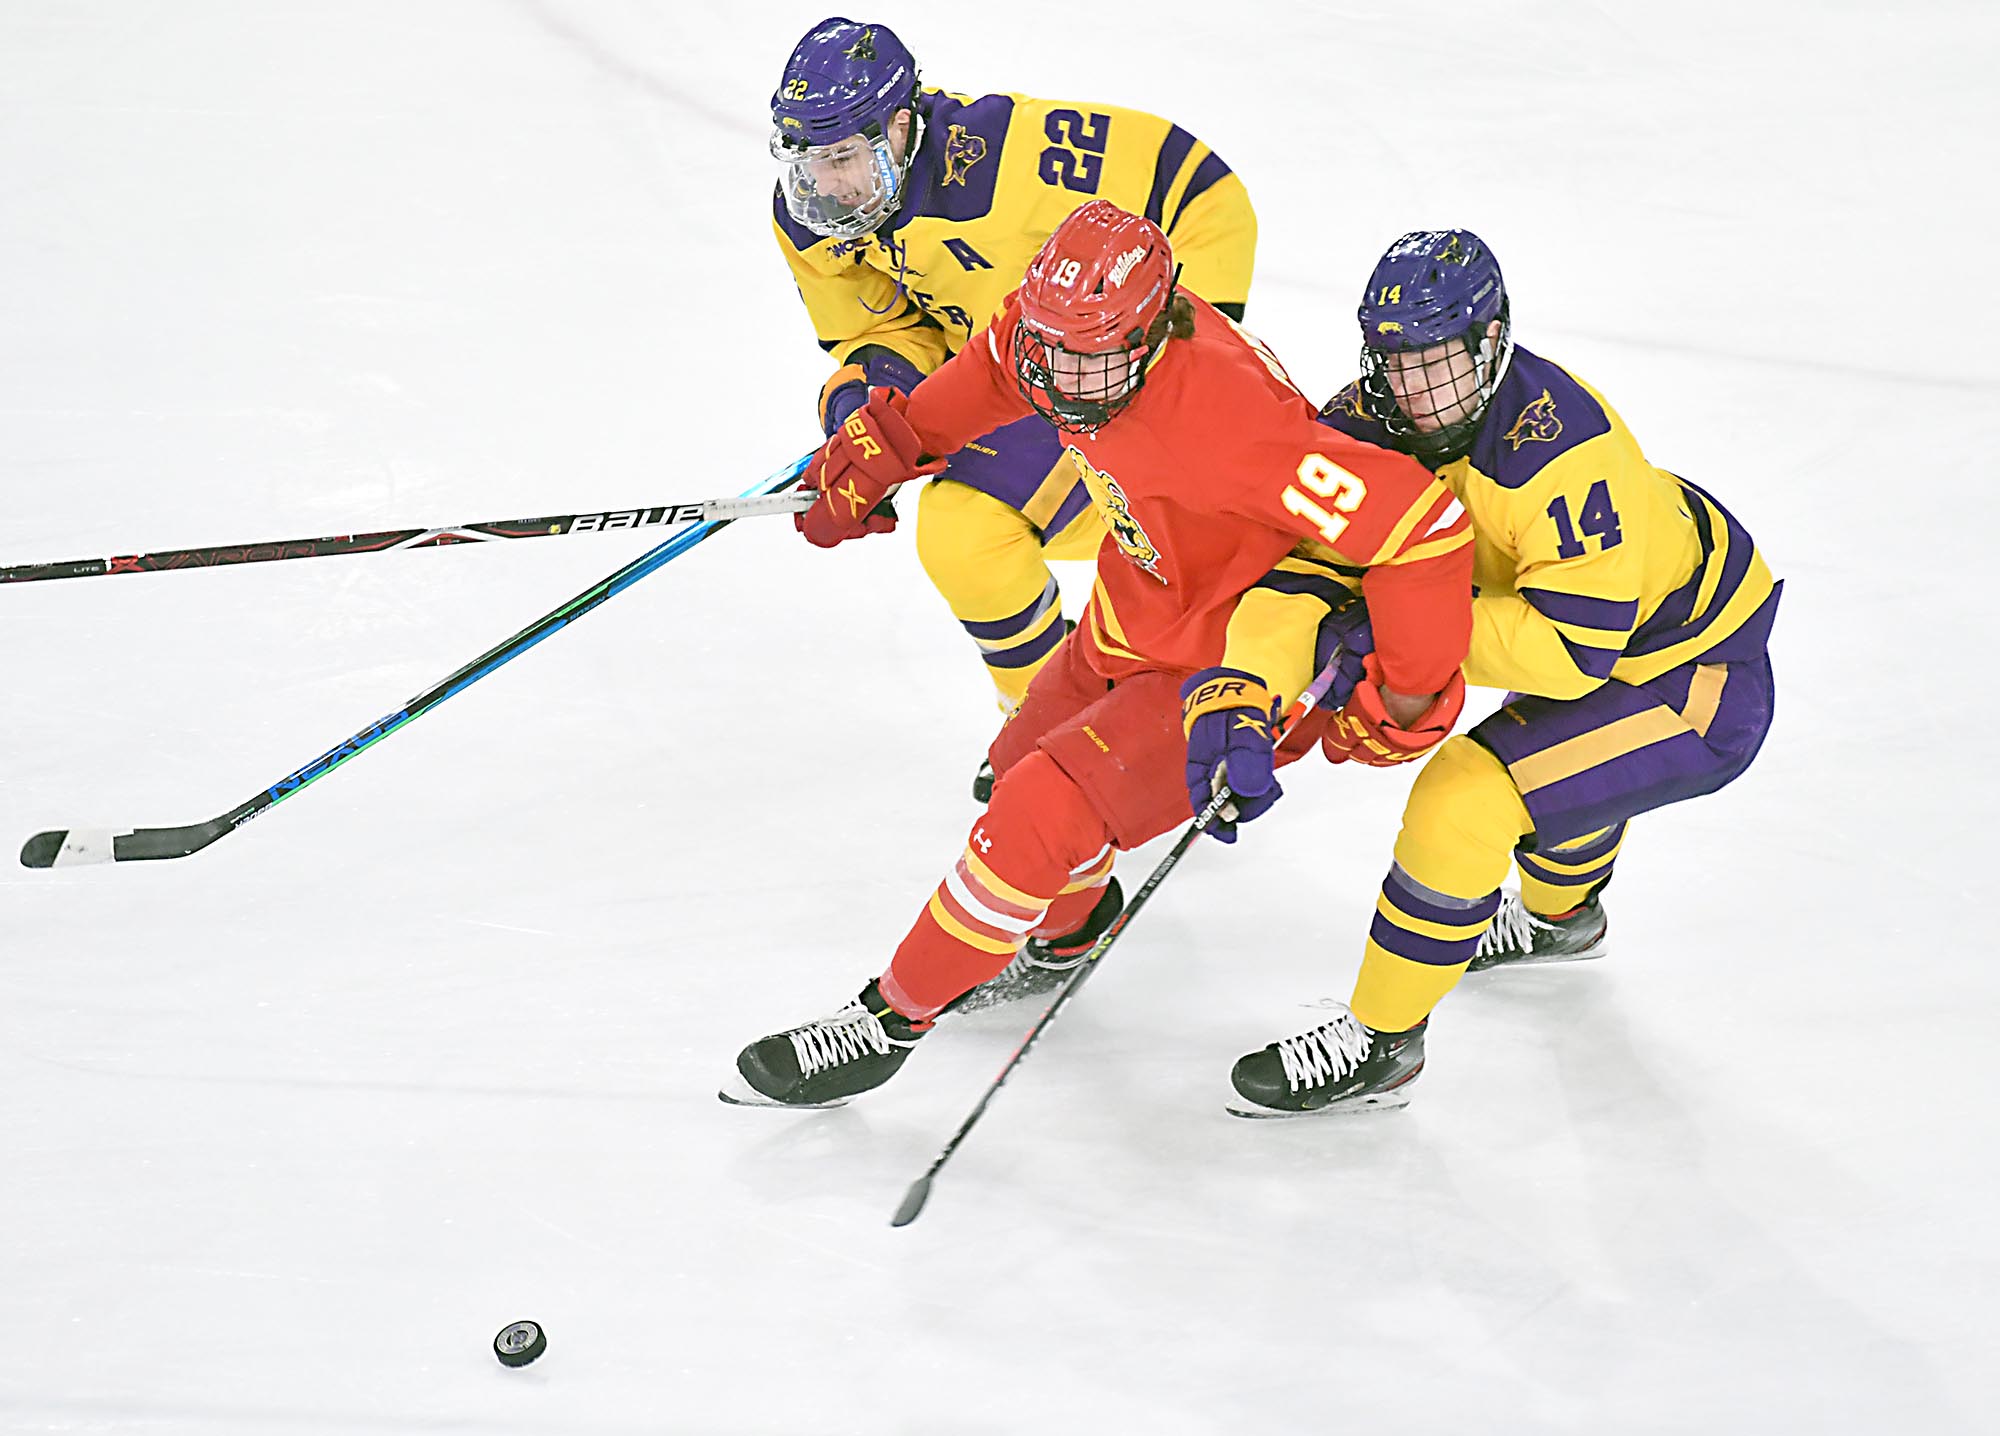 Bulldogs Push #3 Mavericks To The Brink But Fall In WCHA Quarterfinals